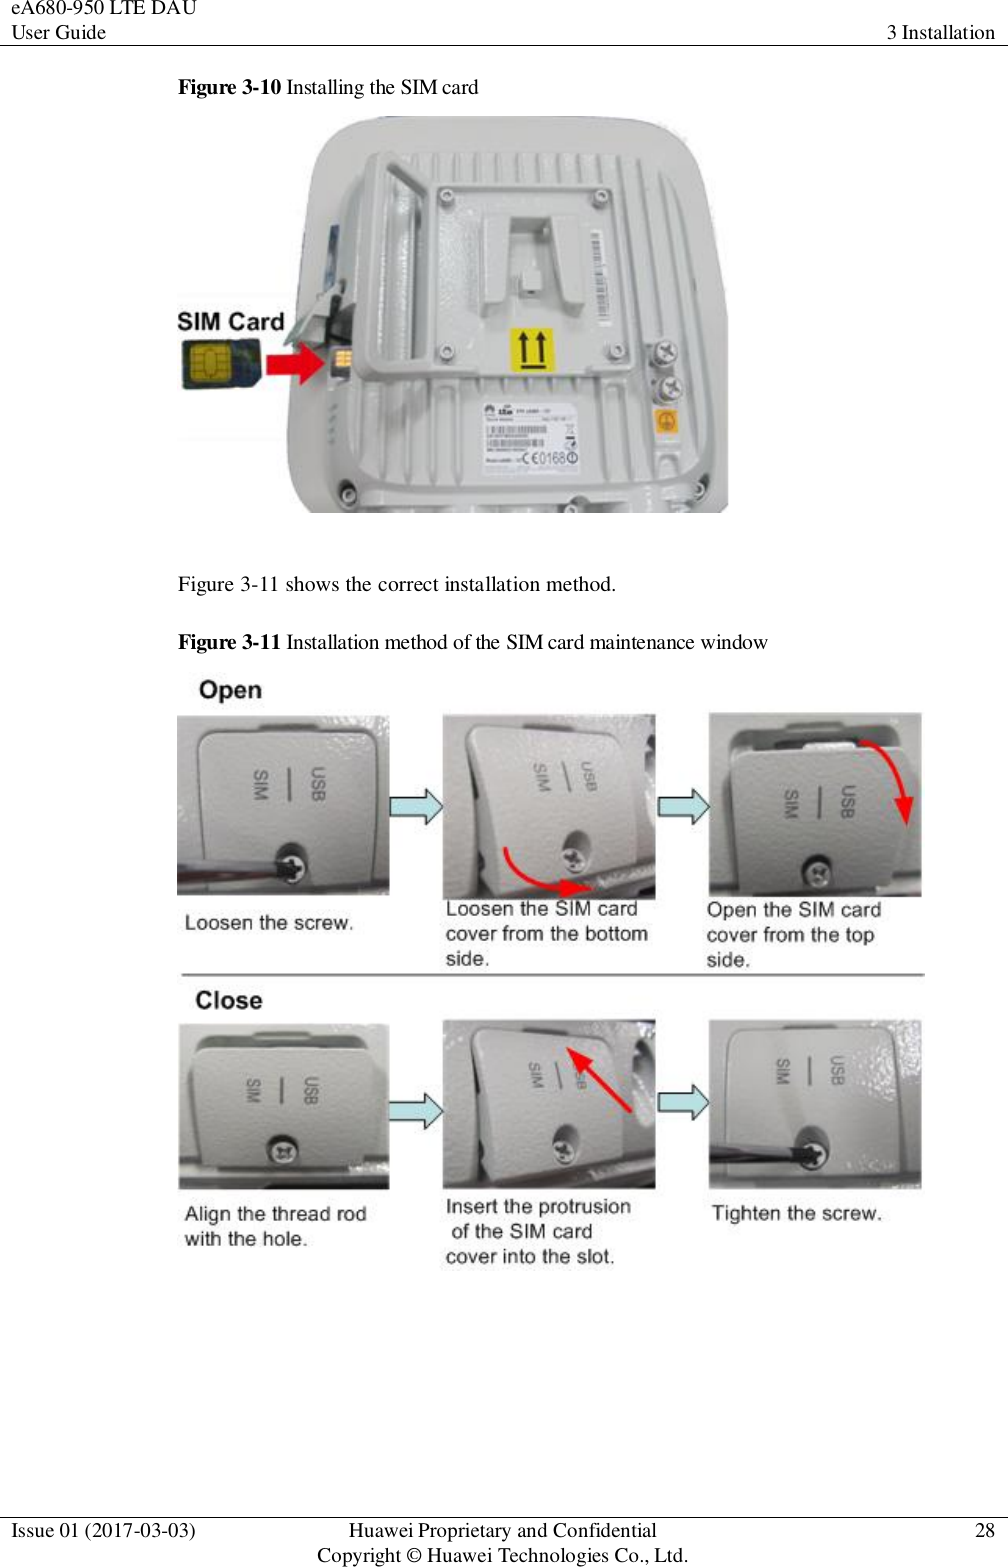 eA680-950 LTE DAU User Guide 3 Installation  Issue 01 (2017-03-03) Huawei Proprietary and Confidential                                     Copyright © Huawei Technologies Co., Ltd. 28  Figure 3-10 Installing the SIM card   Figure 3-11 shows the correct installation method. Figure 3-11 Installation method of the SIM card maintenance window   